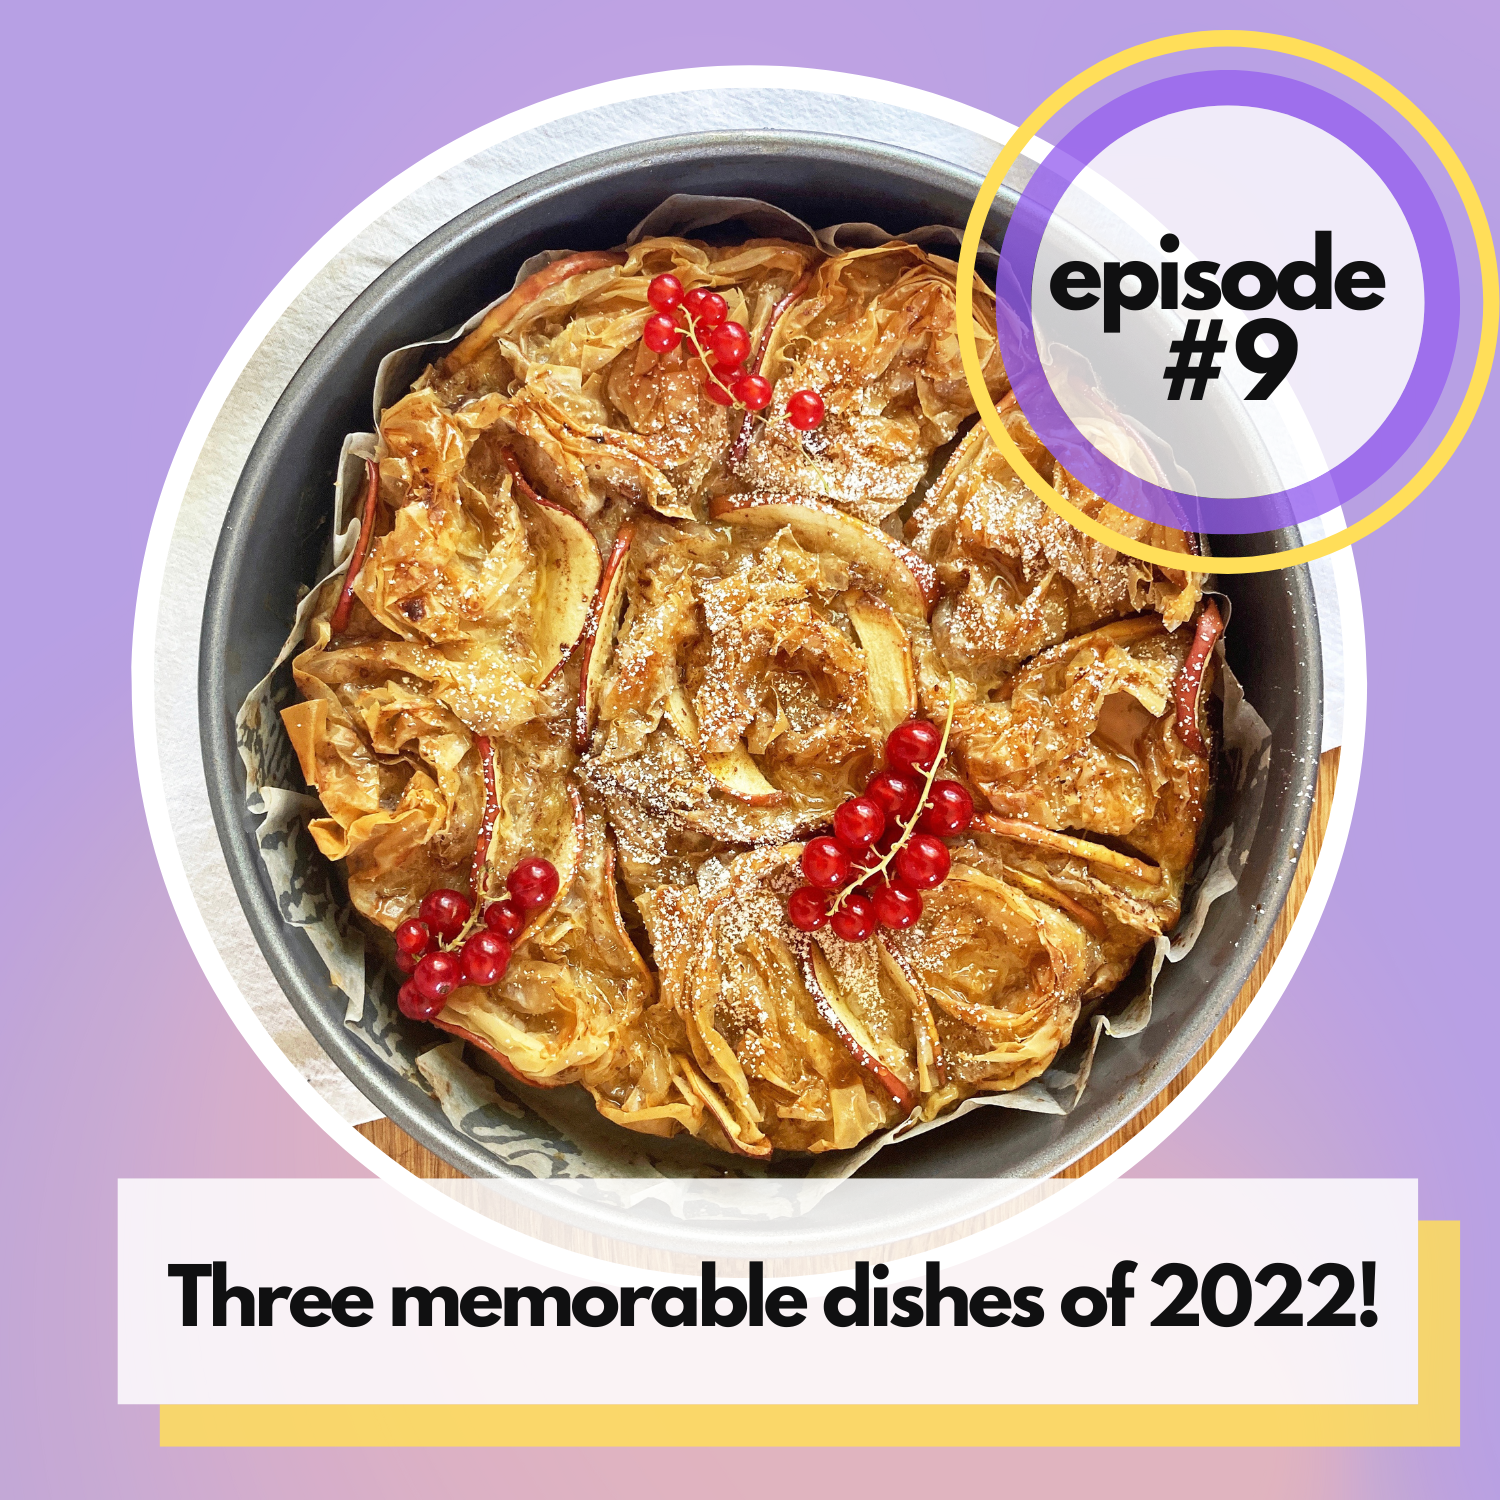 Episode 09: Three memorable dishes of 2022!